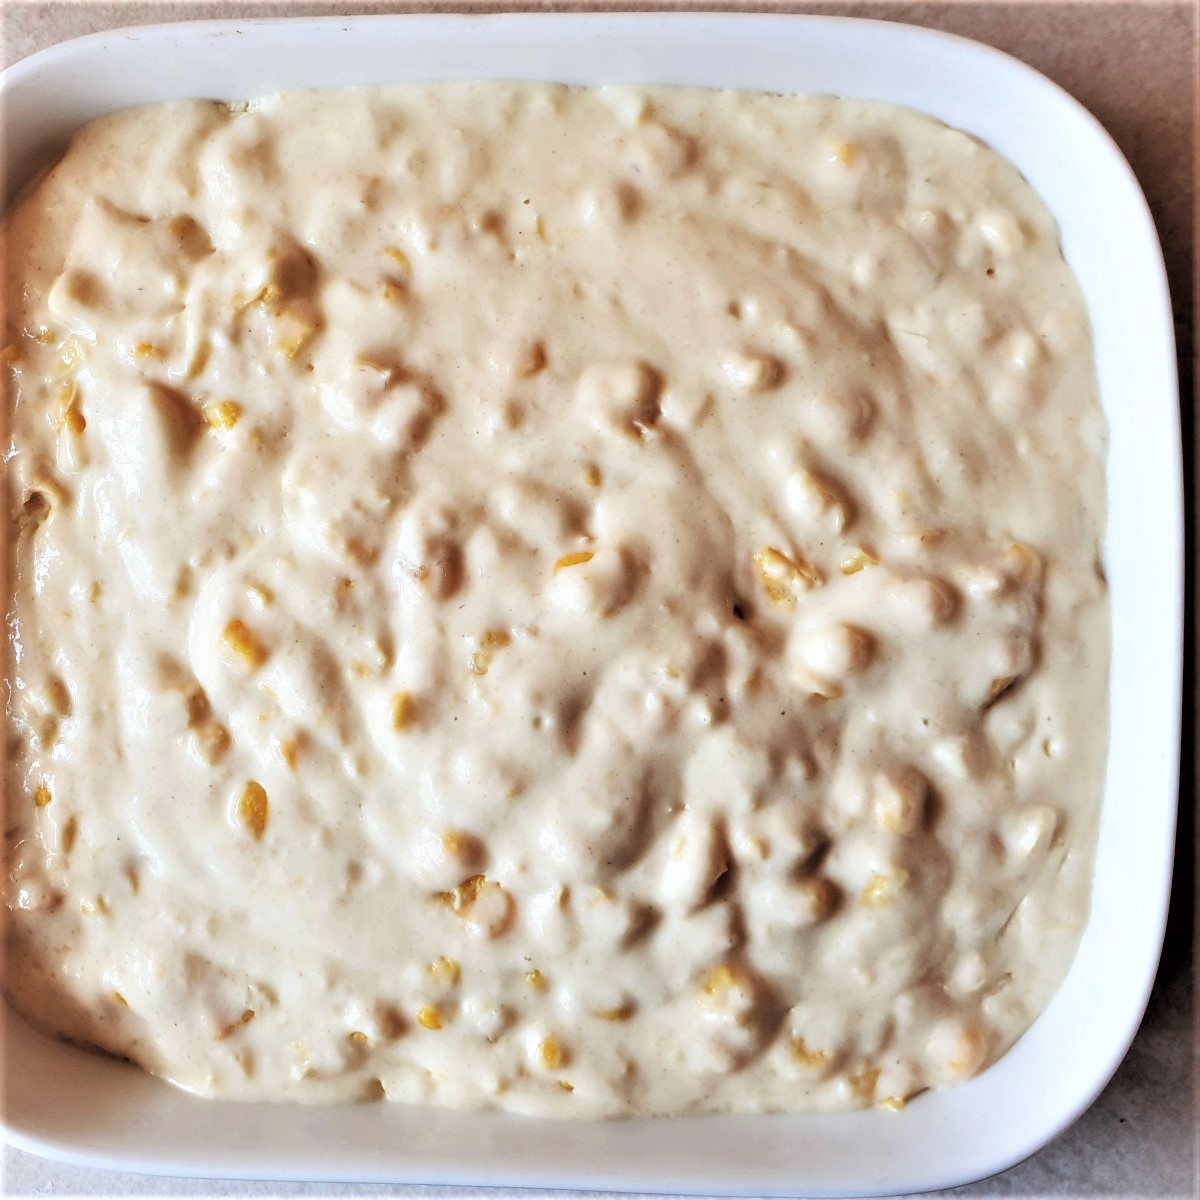 A dish of cornbread casserole batter ready for the oven.